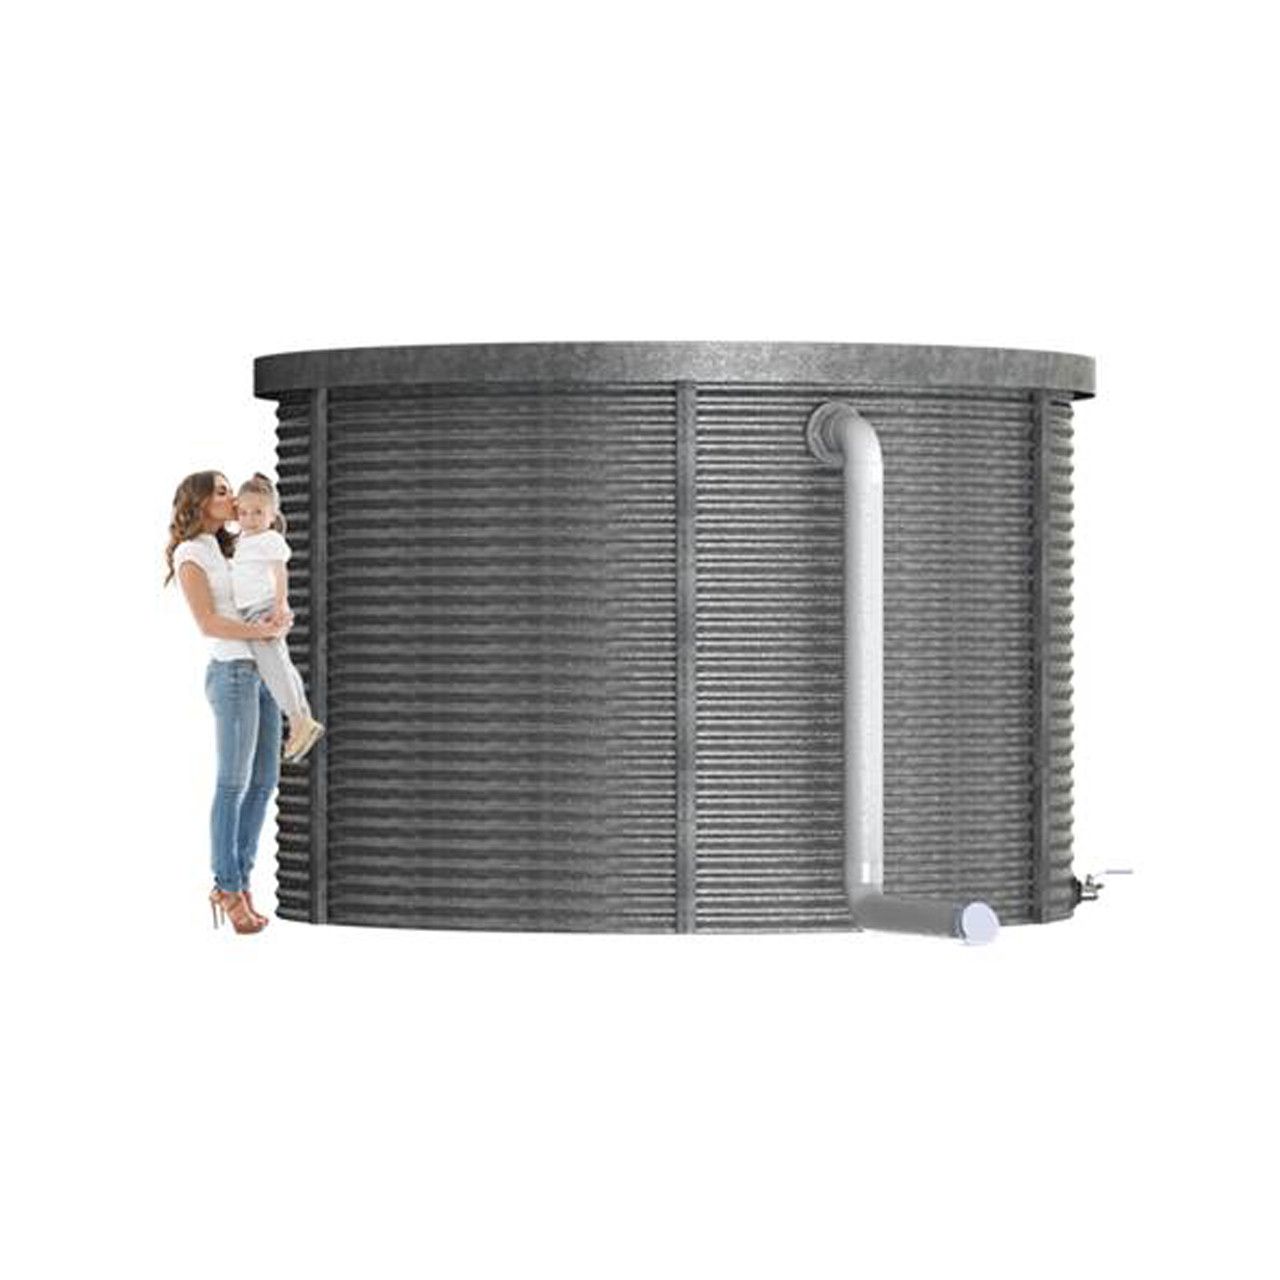 5,000 gallon DIY Water Storage Tank Kit, you can build a water tank for a fraction of the cost.